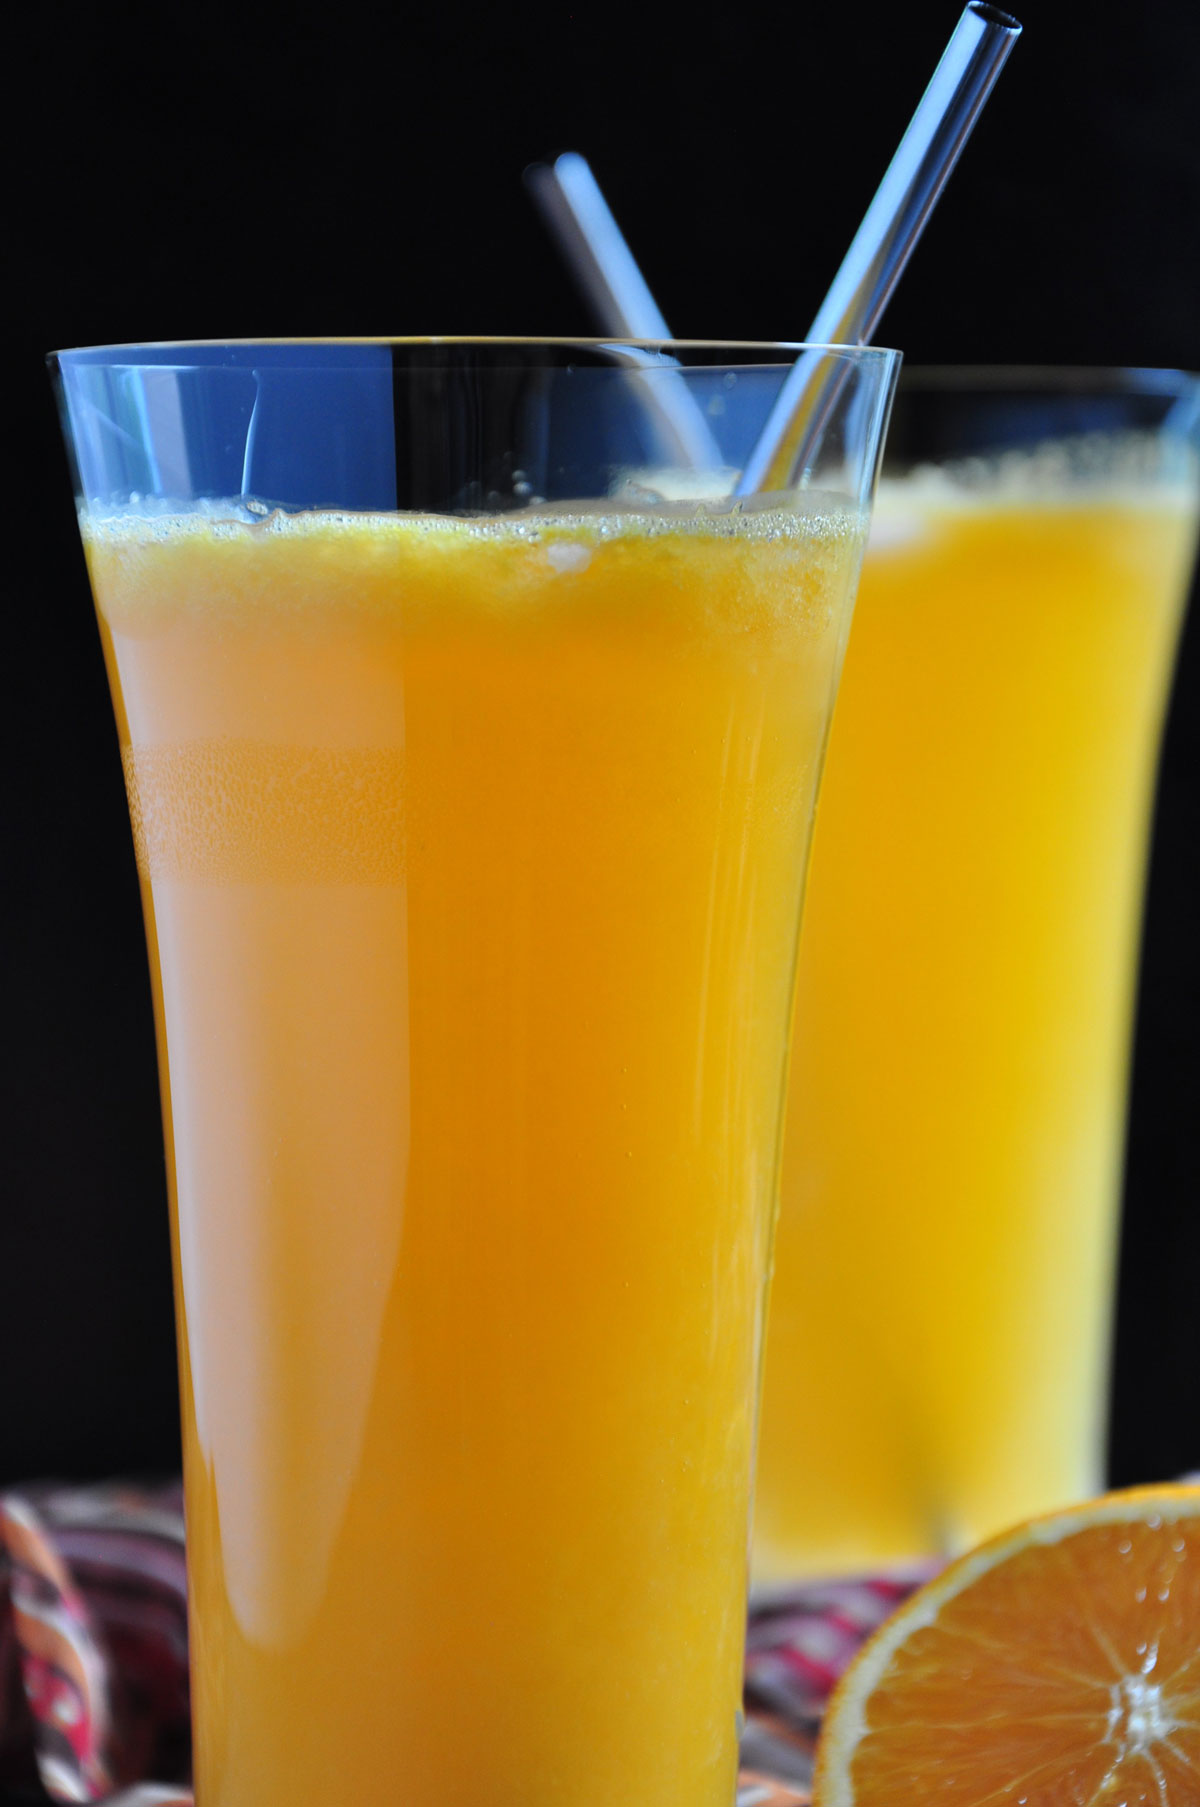 Orange Soda in two tall glass with straws and black background.